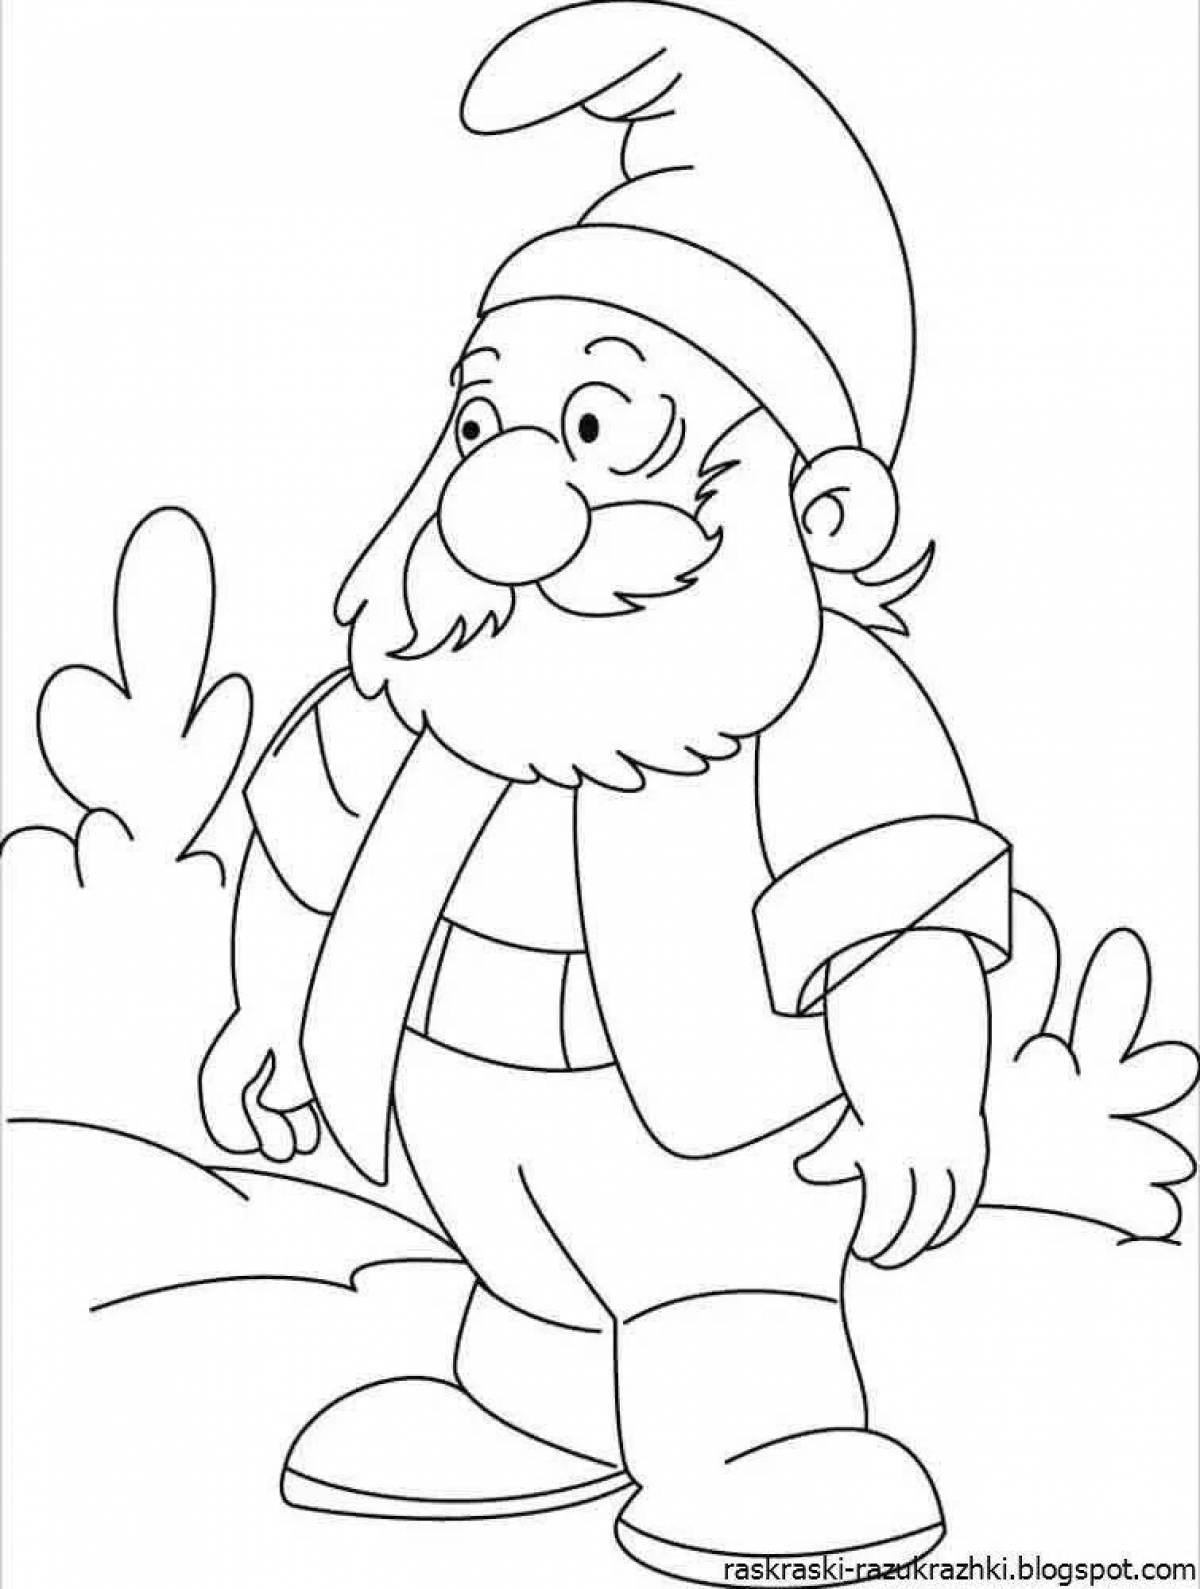 Adorable gnome coloring book for kids